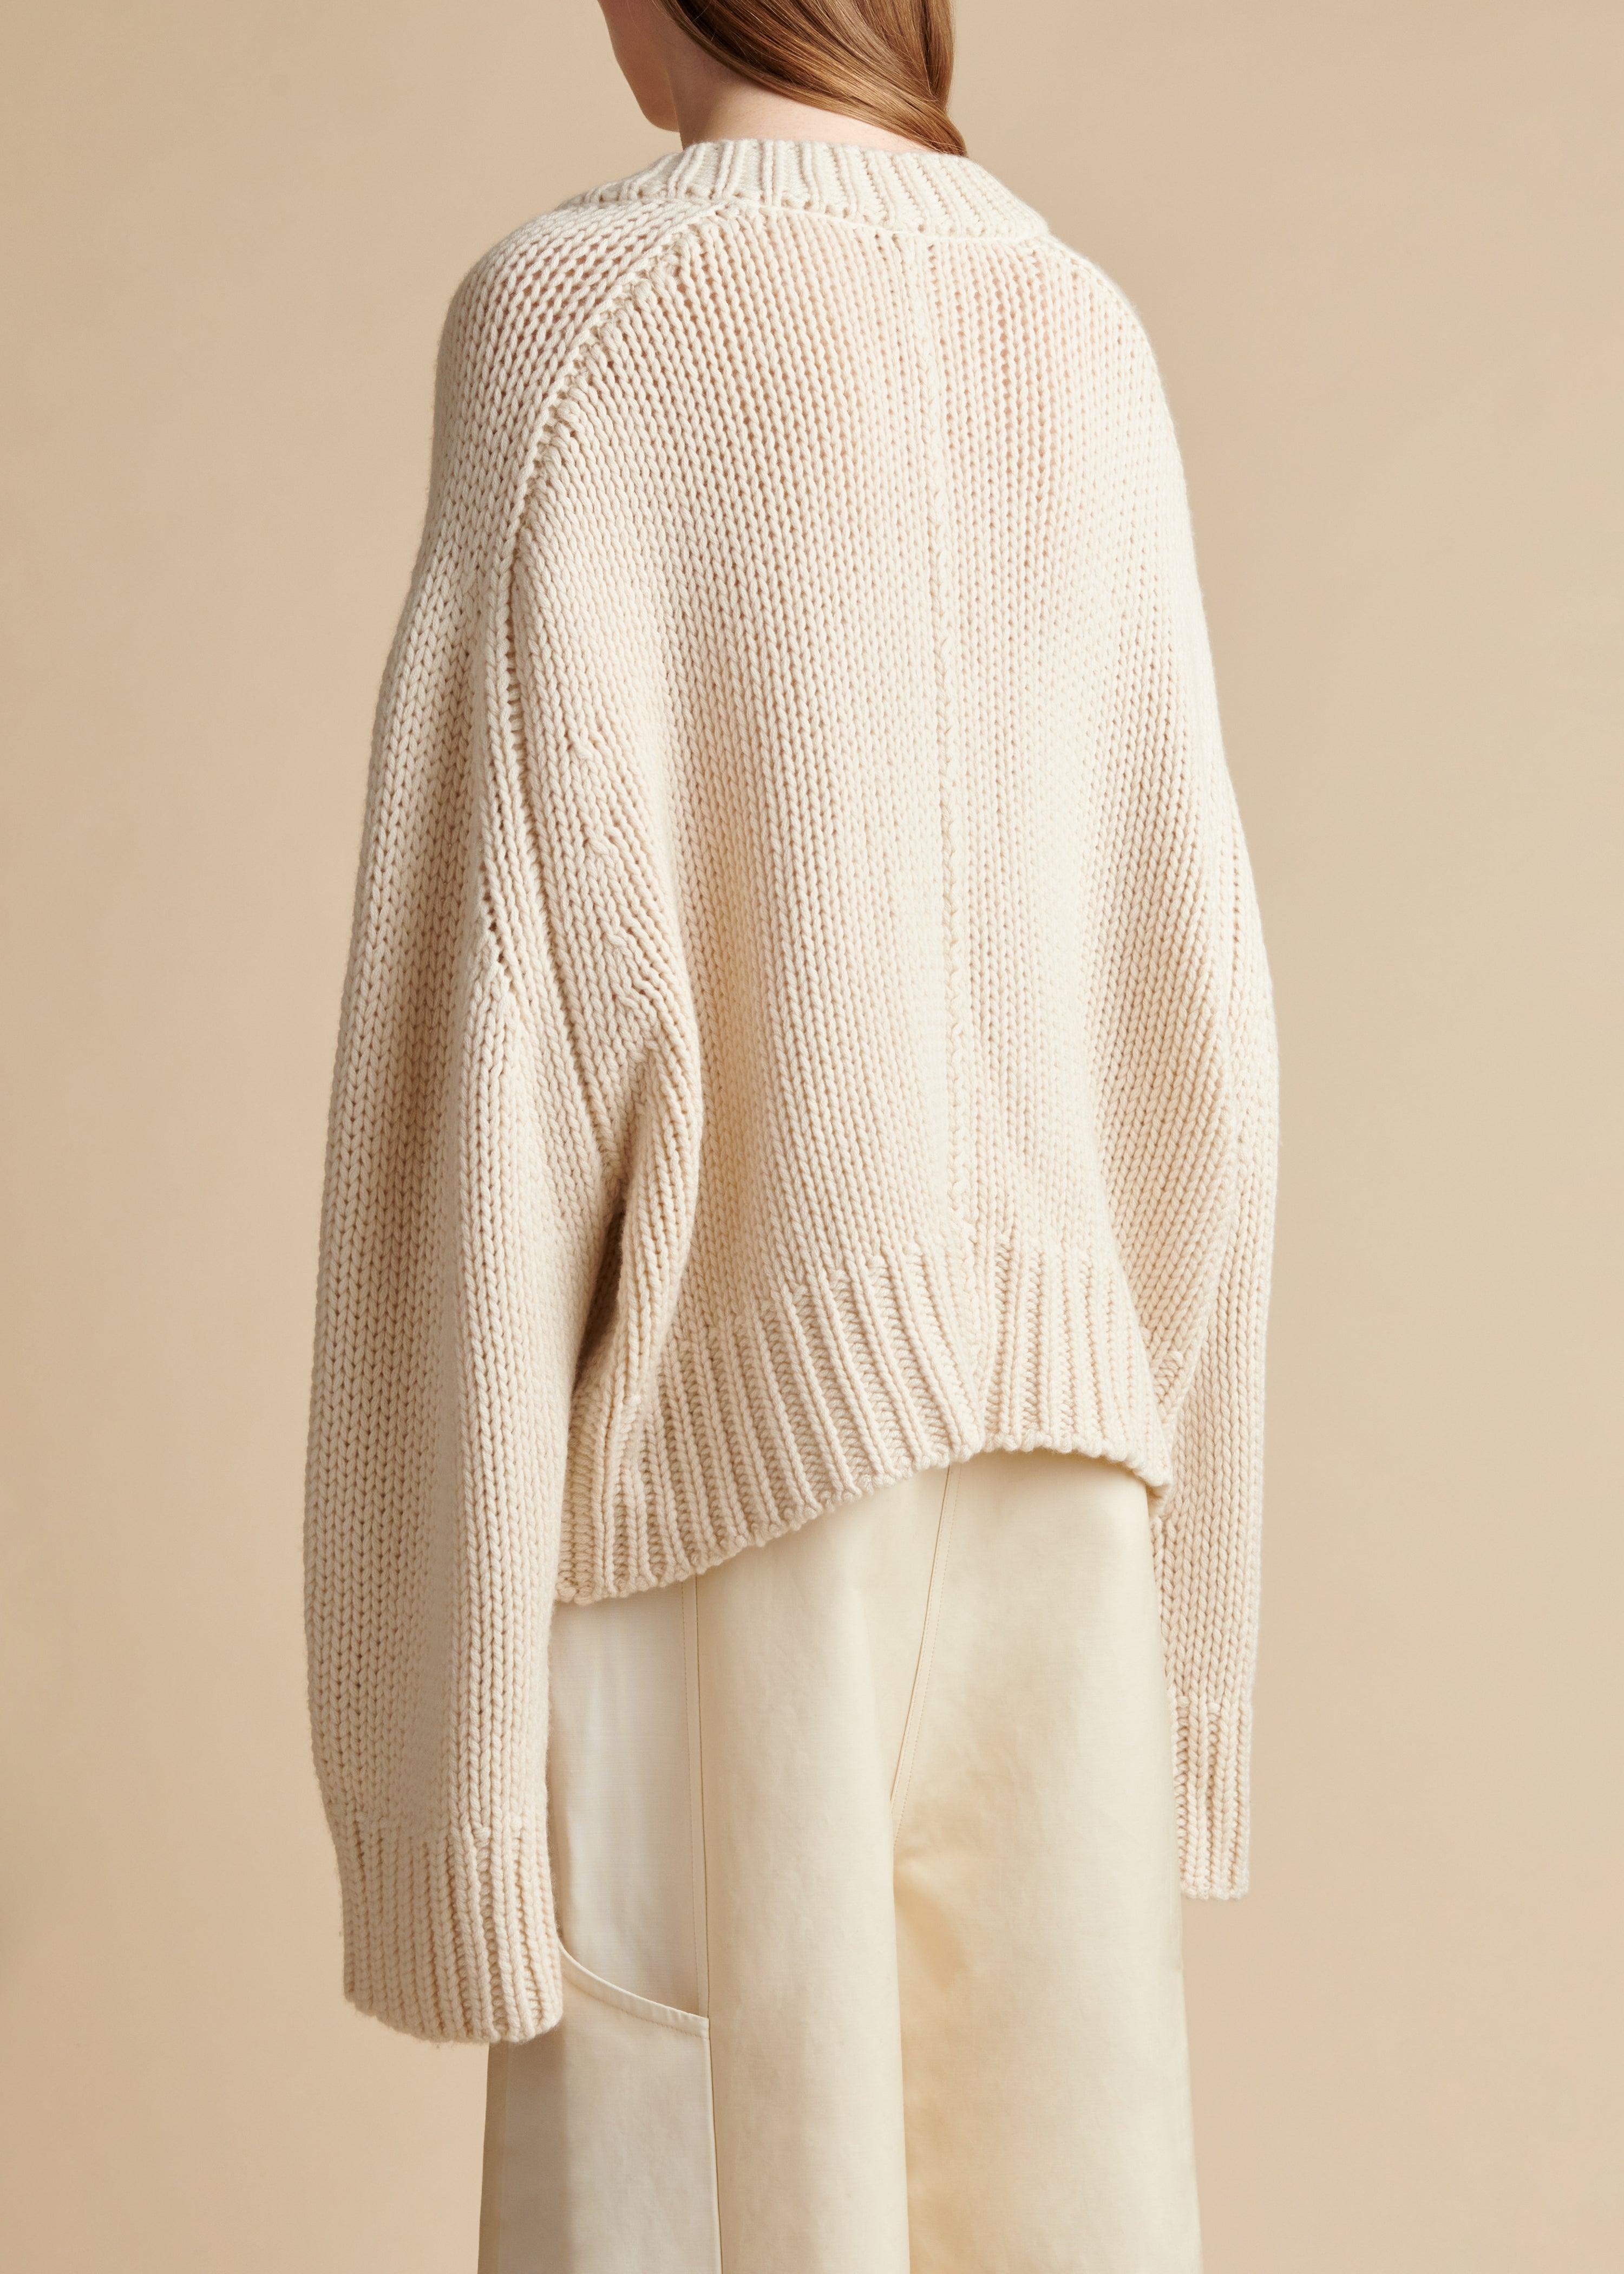 The Lucinda Sweater in Cream - The Iconic Issue